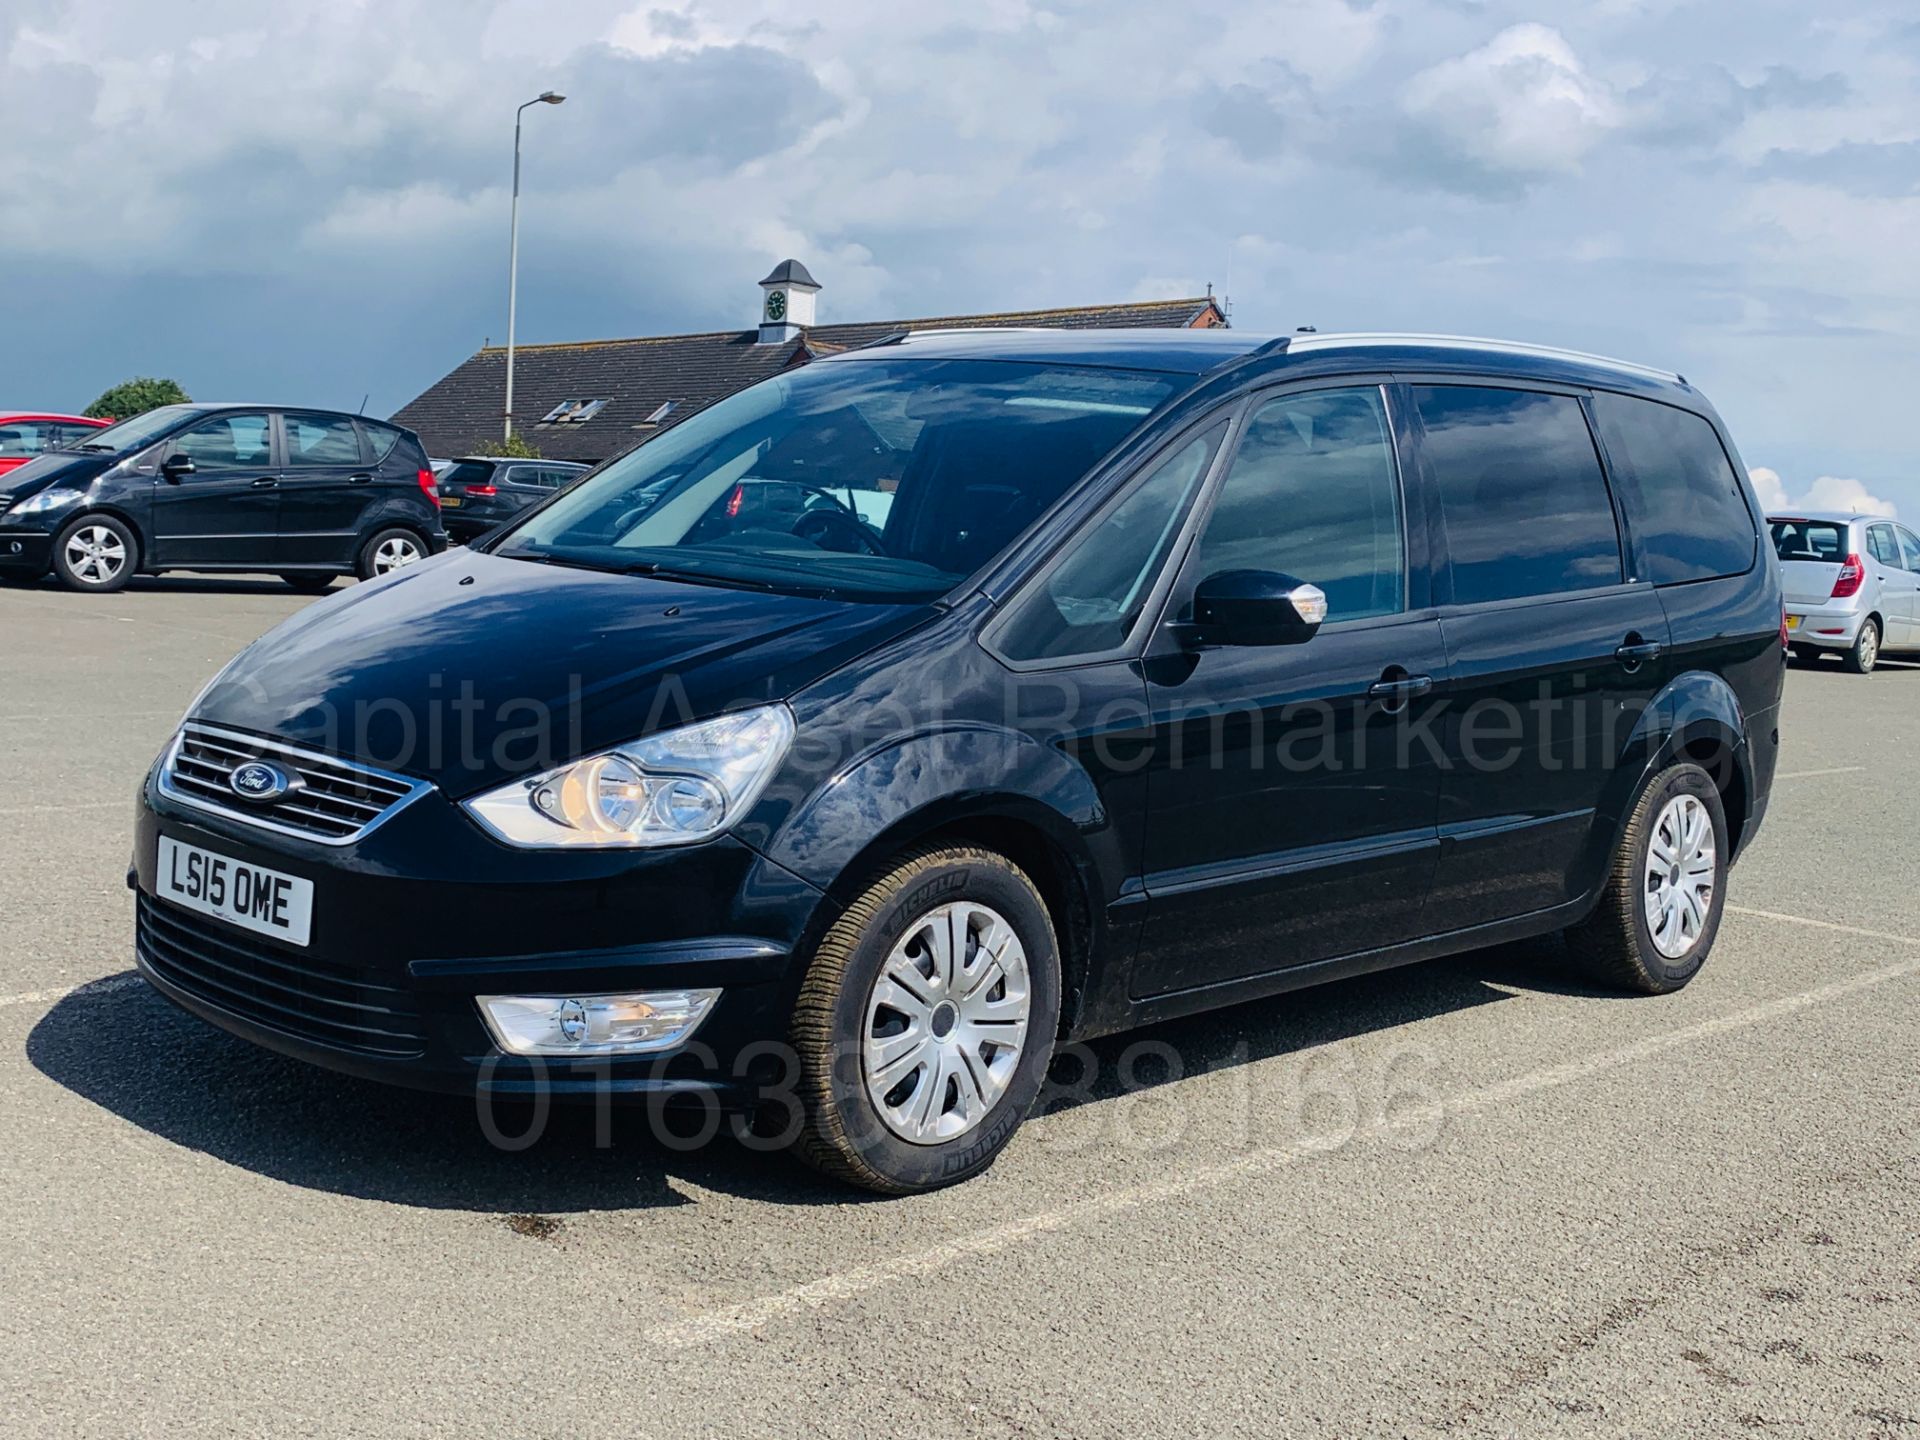 (On Sale) FORD GALAXY *ZETEC* 7 SEATER MPV (2015) '2.0 TDCI - 140 BHP - POWER SHIFT' (1 OWNER)